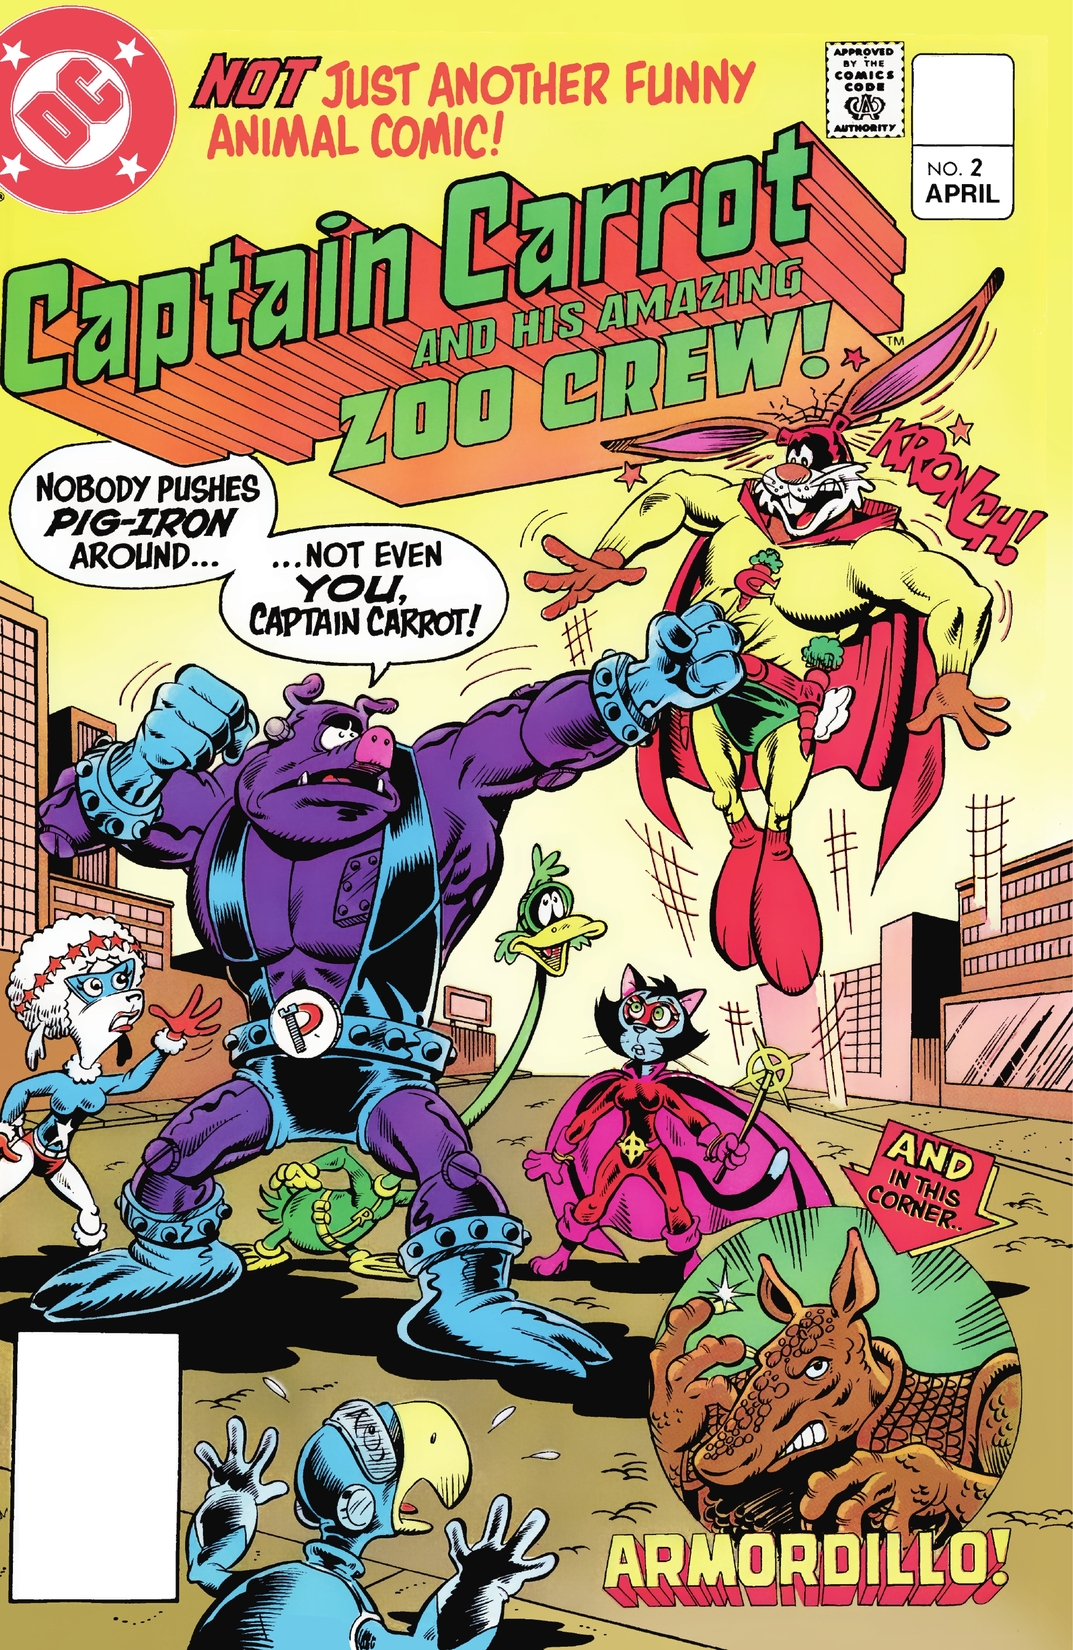 Captain Carrot and His Amazing Zoo Crew #2 preview images